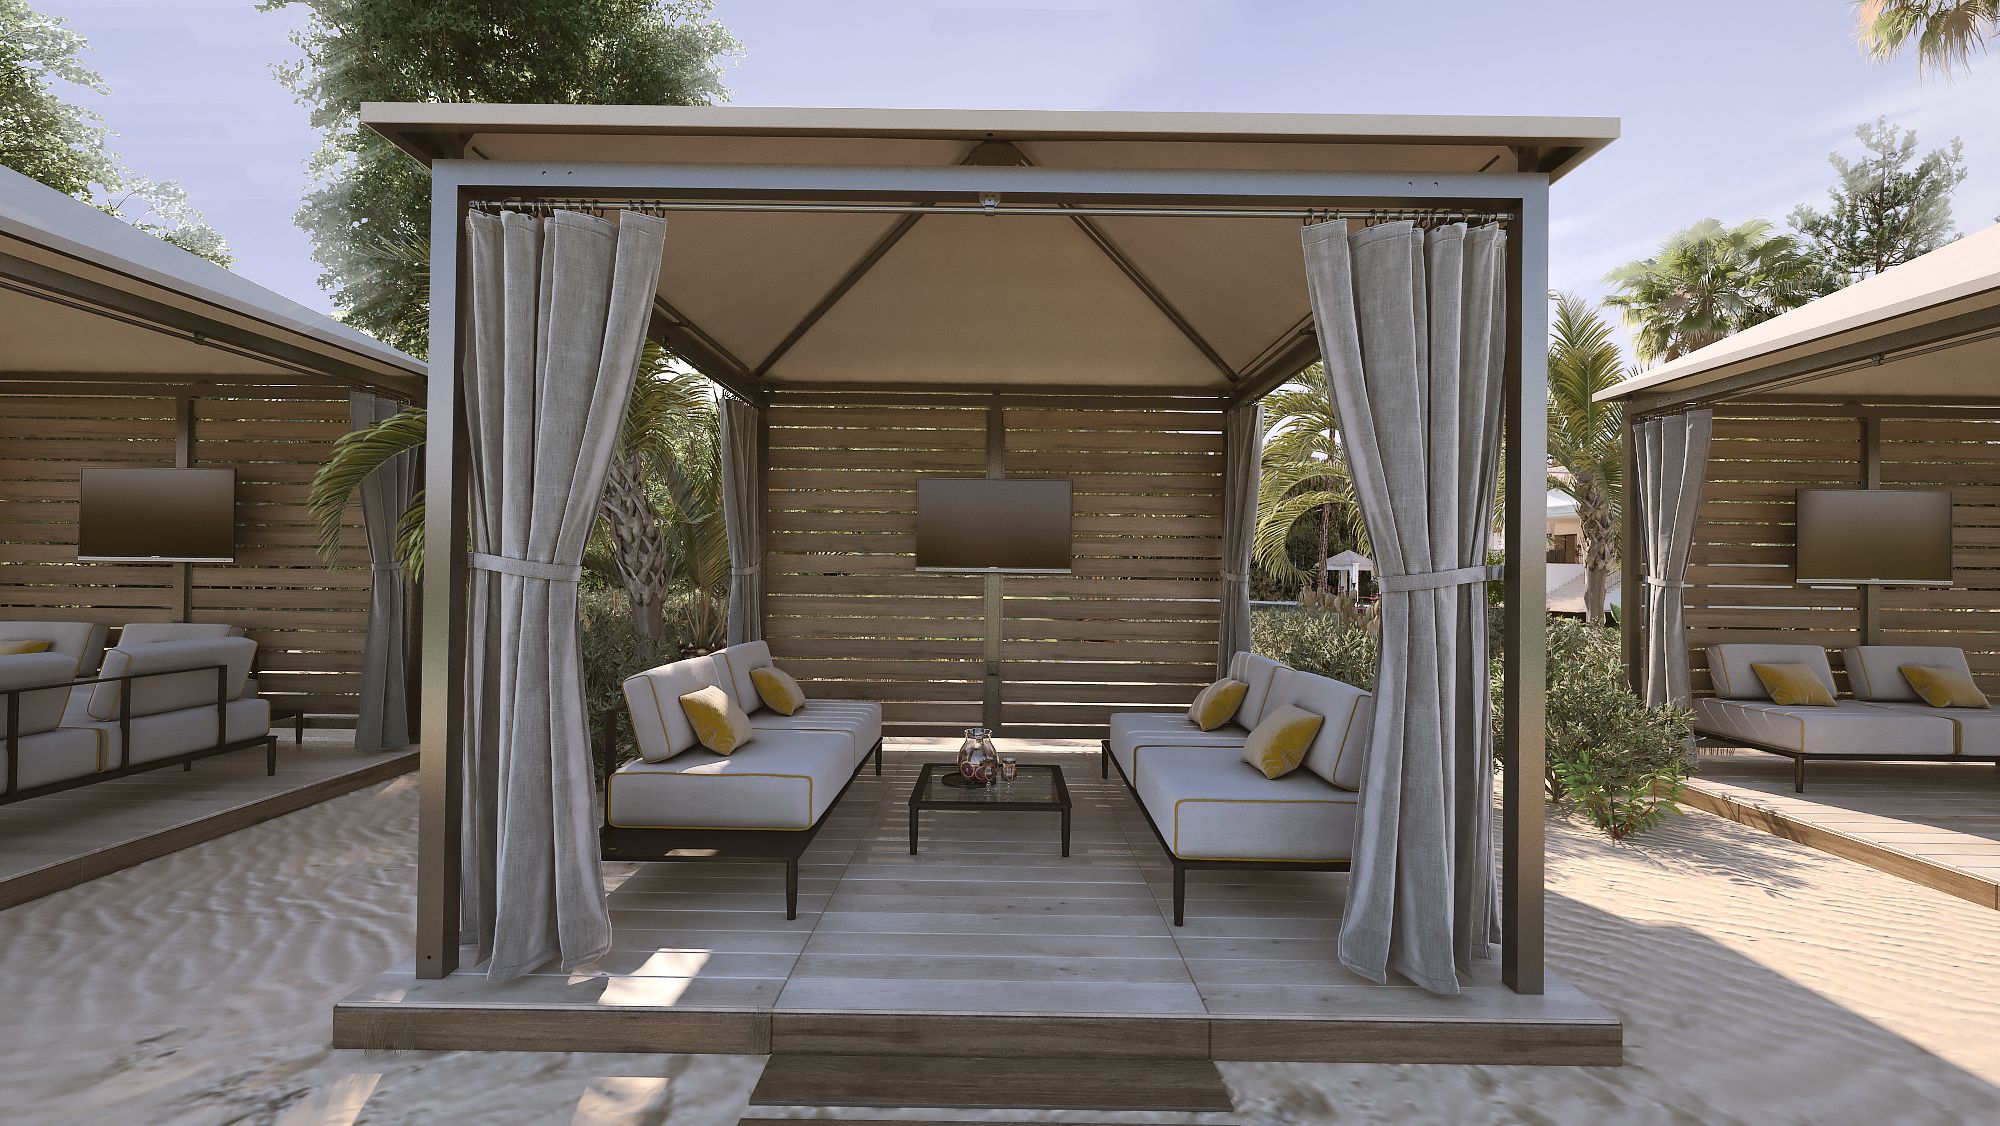 Academy Design's VIP cabana, photo taken from the front, showcasing its corrosion-resistant 6061-T6 aluminum frame and marine-grade fabric peaked roof with no valance. The full privacy curtains, made of marine-grade upholstery fabric, can be closed for shade or privacy, epitomizing luxury for upscale hospitality settings.